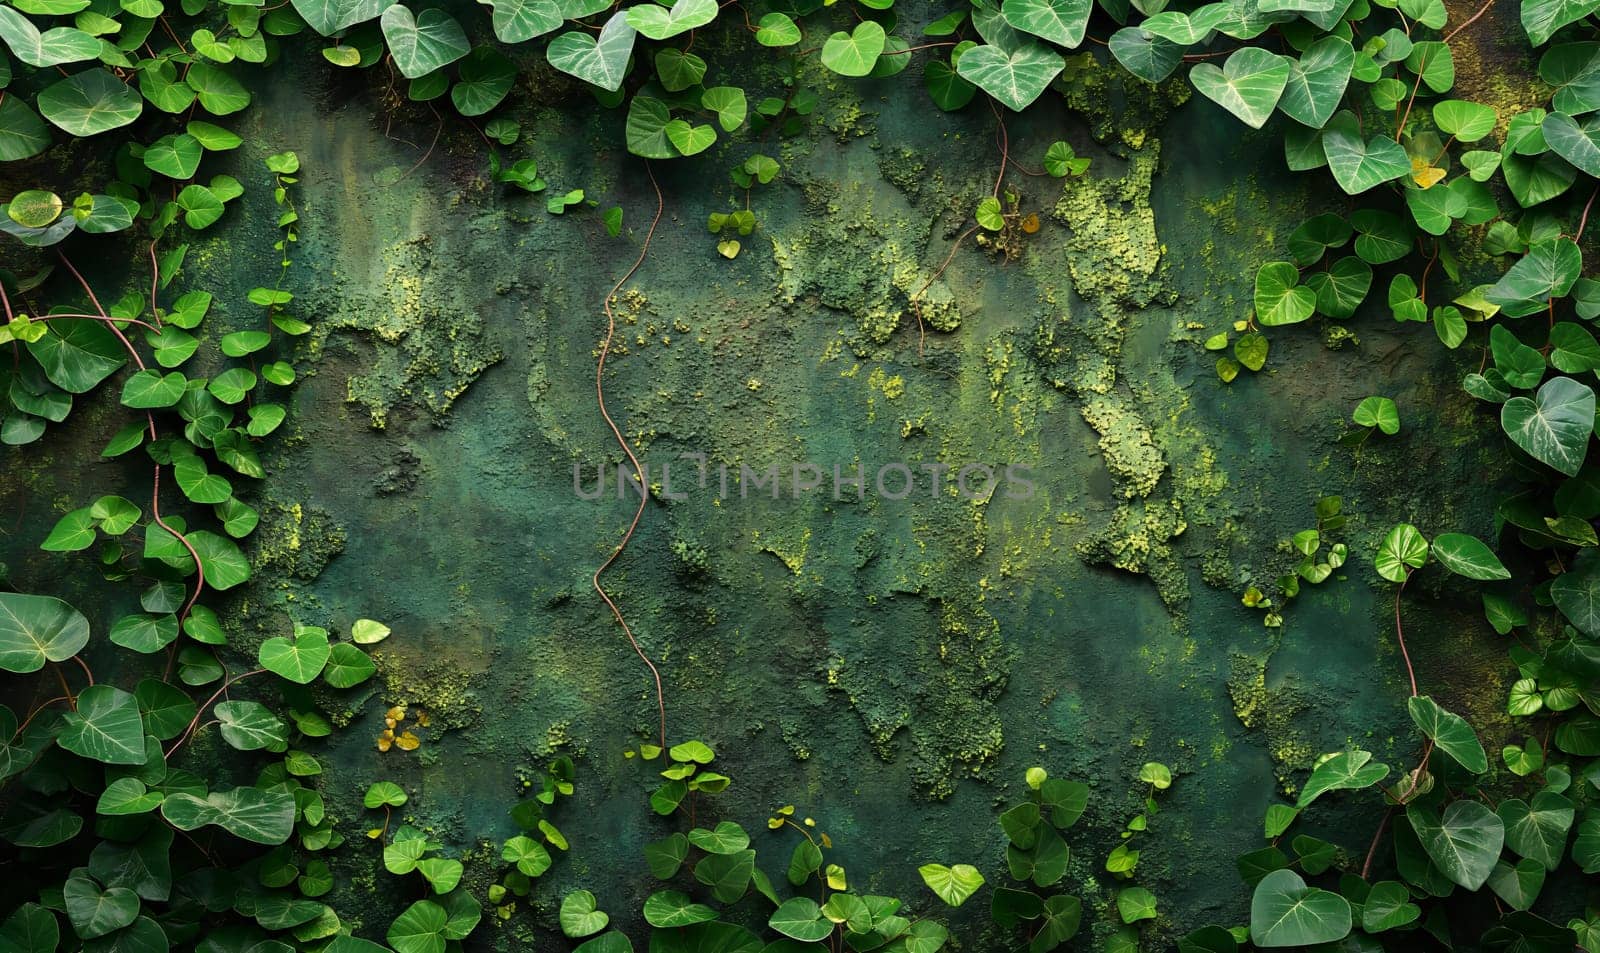 Green texture background with green leaves. Selective soft focus.